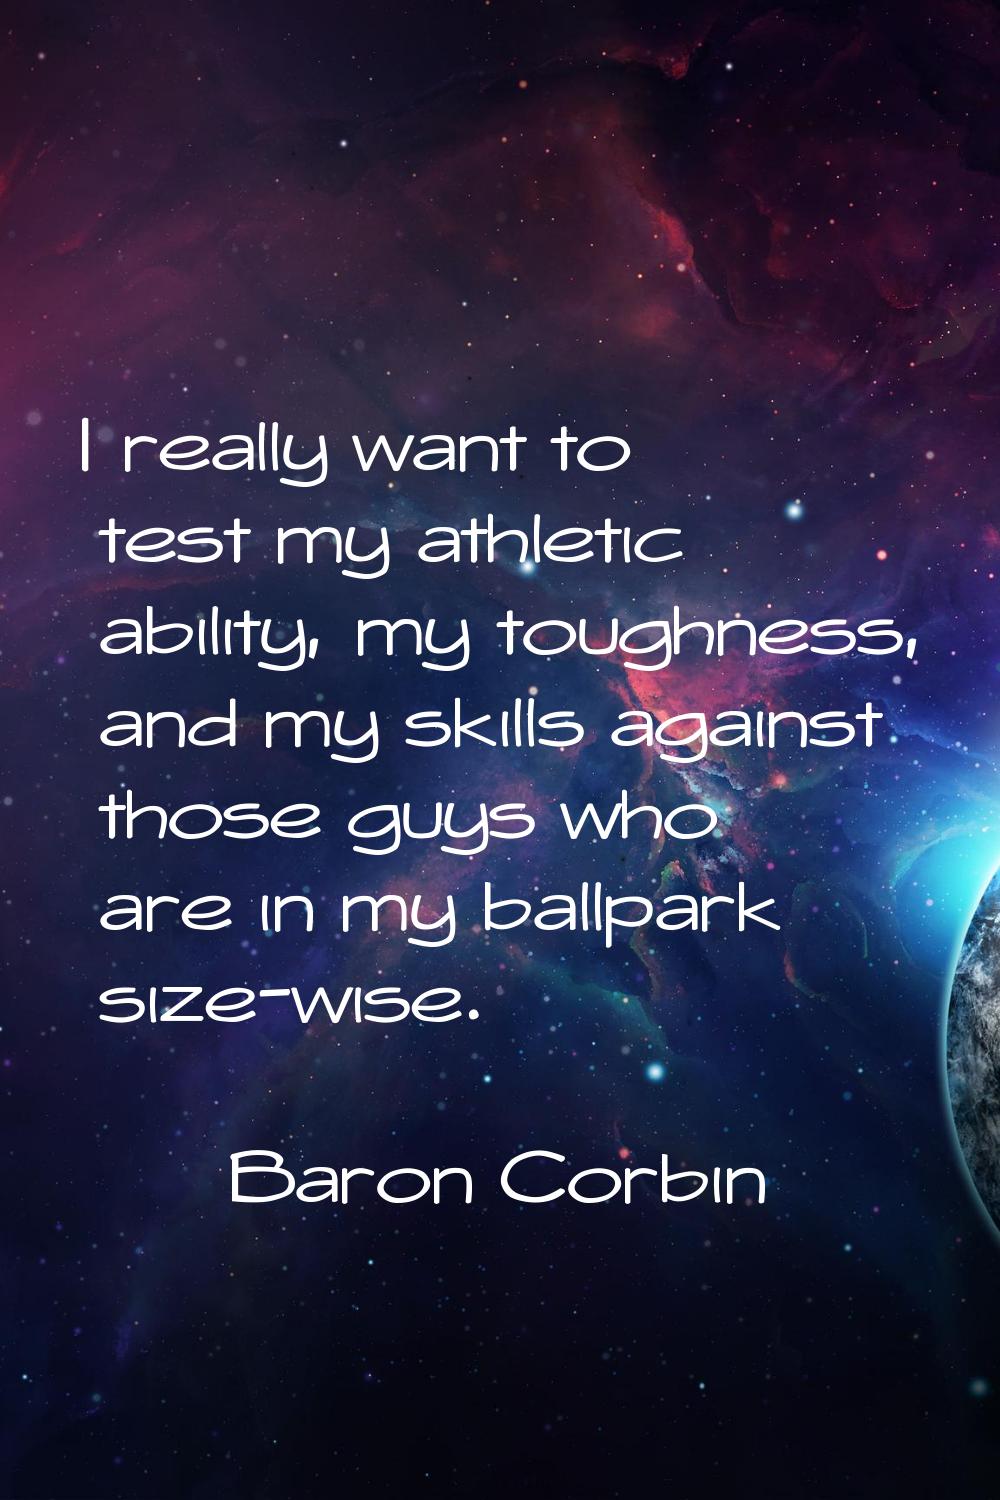 I really want to test my athletic ability, my toughness, and my skills against those guys who are i